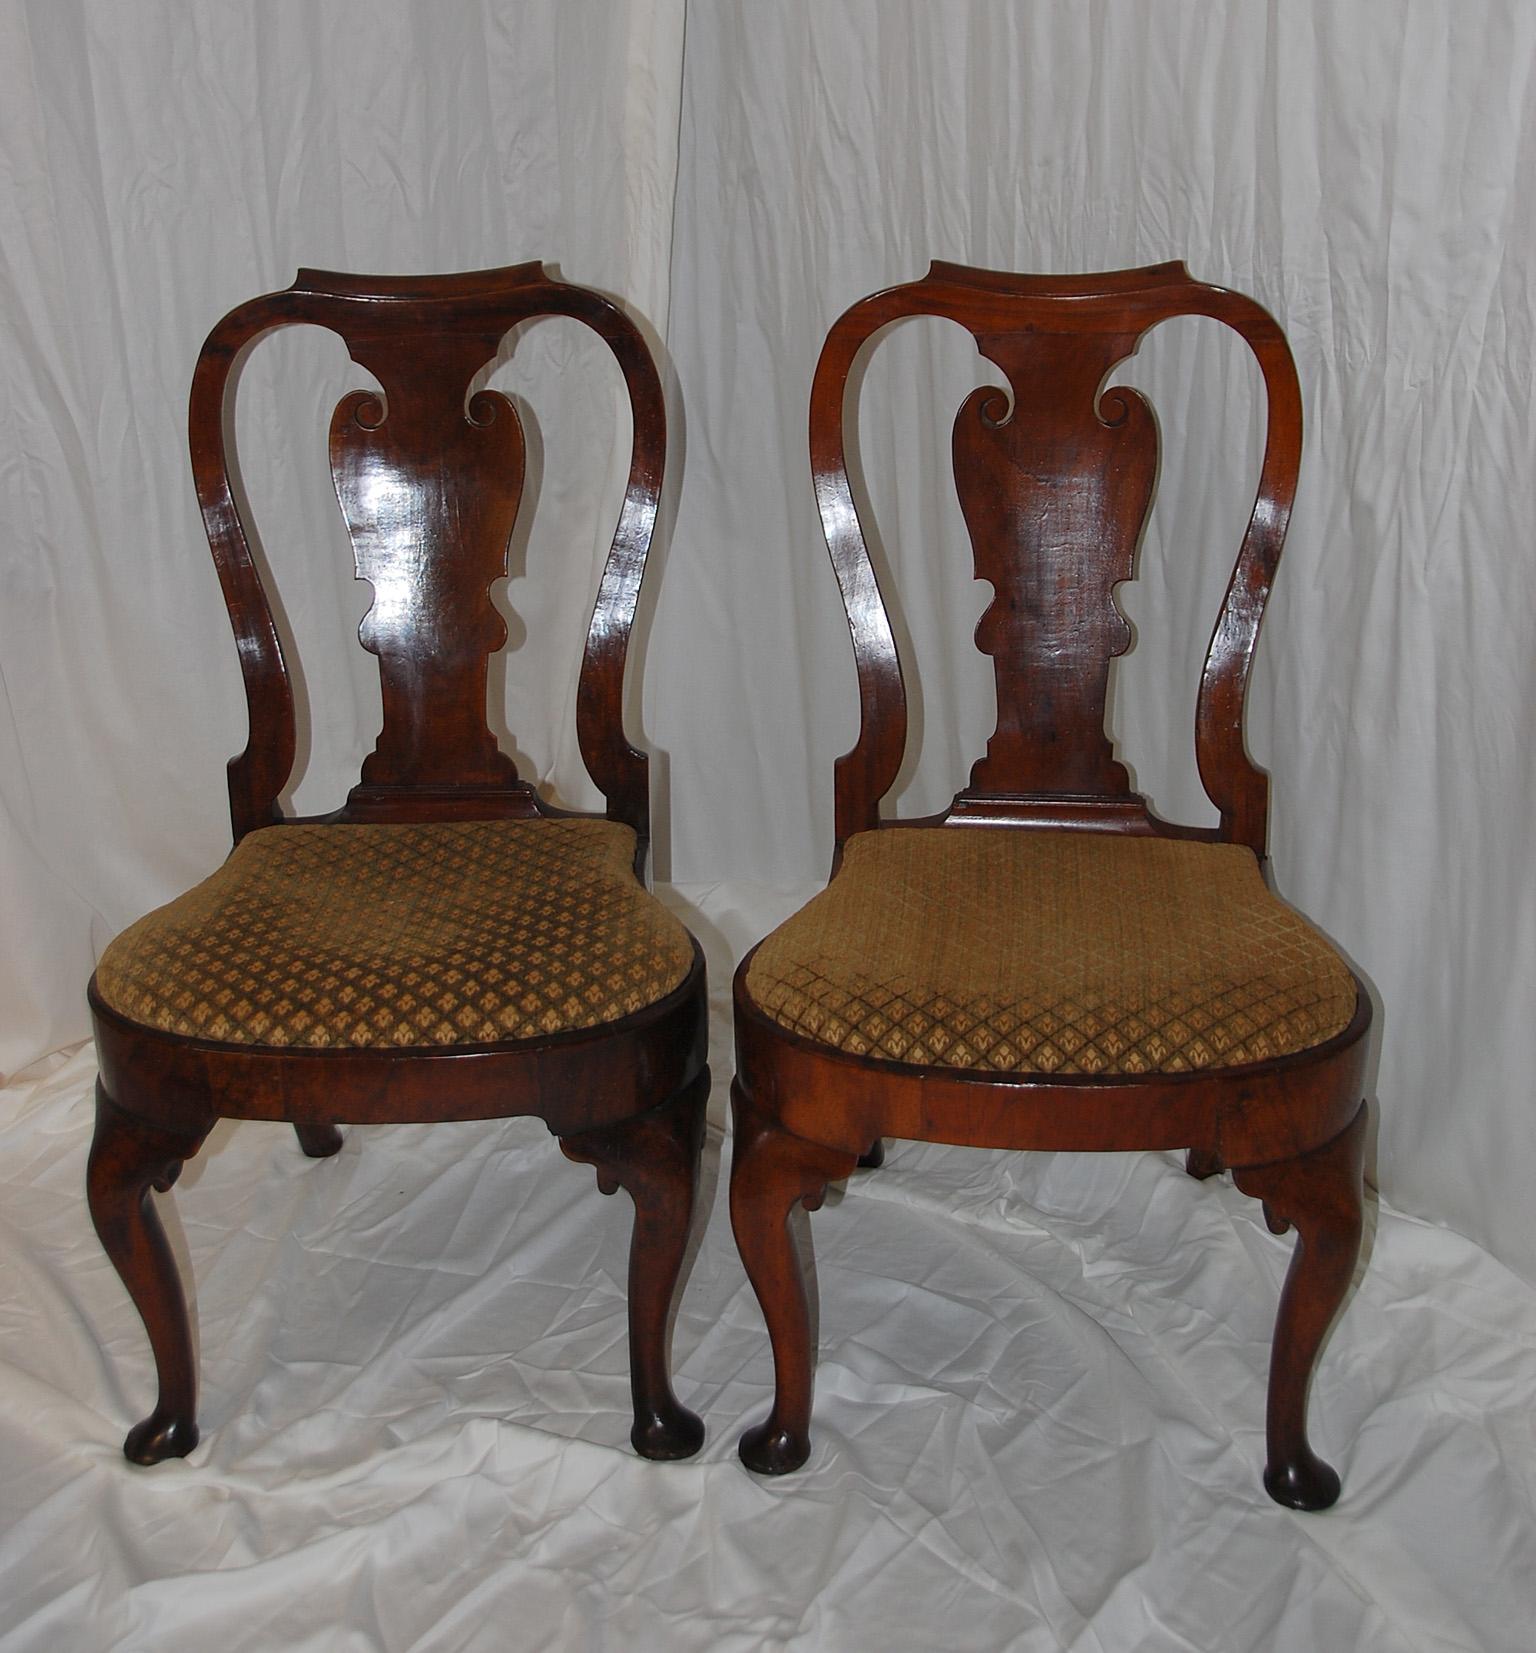 English Queen Anne period walnut pair of balloon seated sidechairs with cabriole legs, pad feet and lovely curved and waisted back. The upholstery is about 10 years old, as is a repair to one back leg which had to be spliced about 5